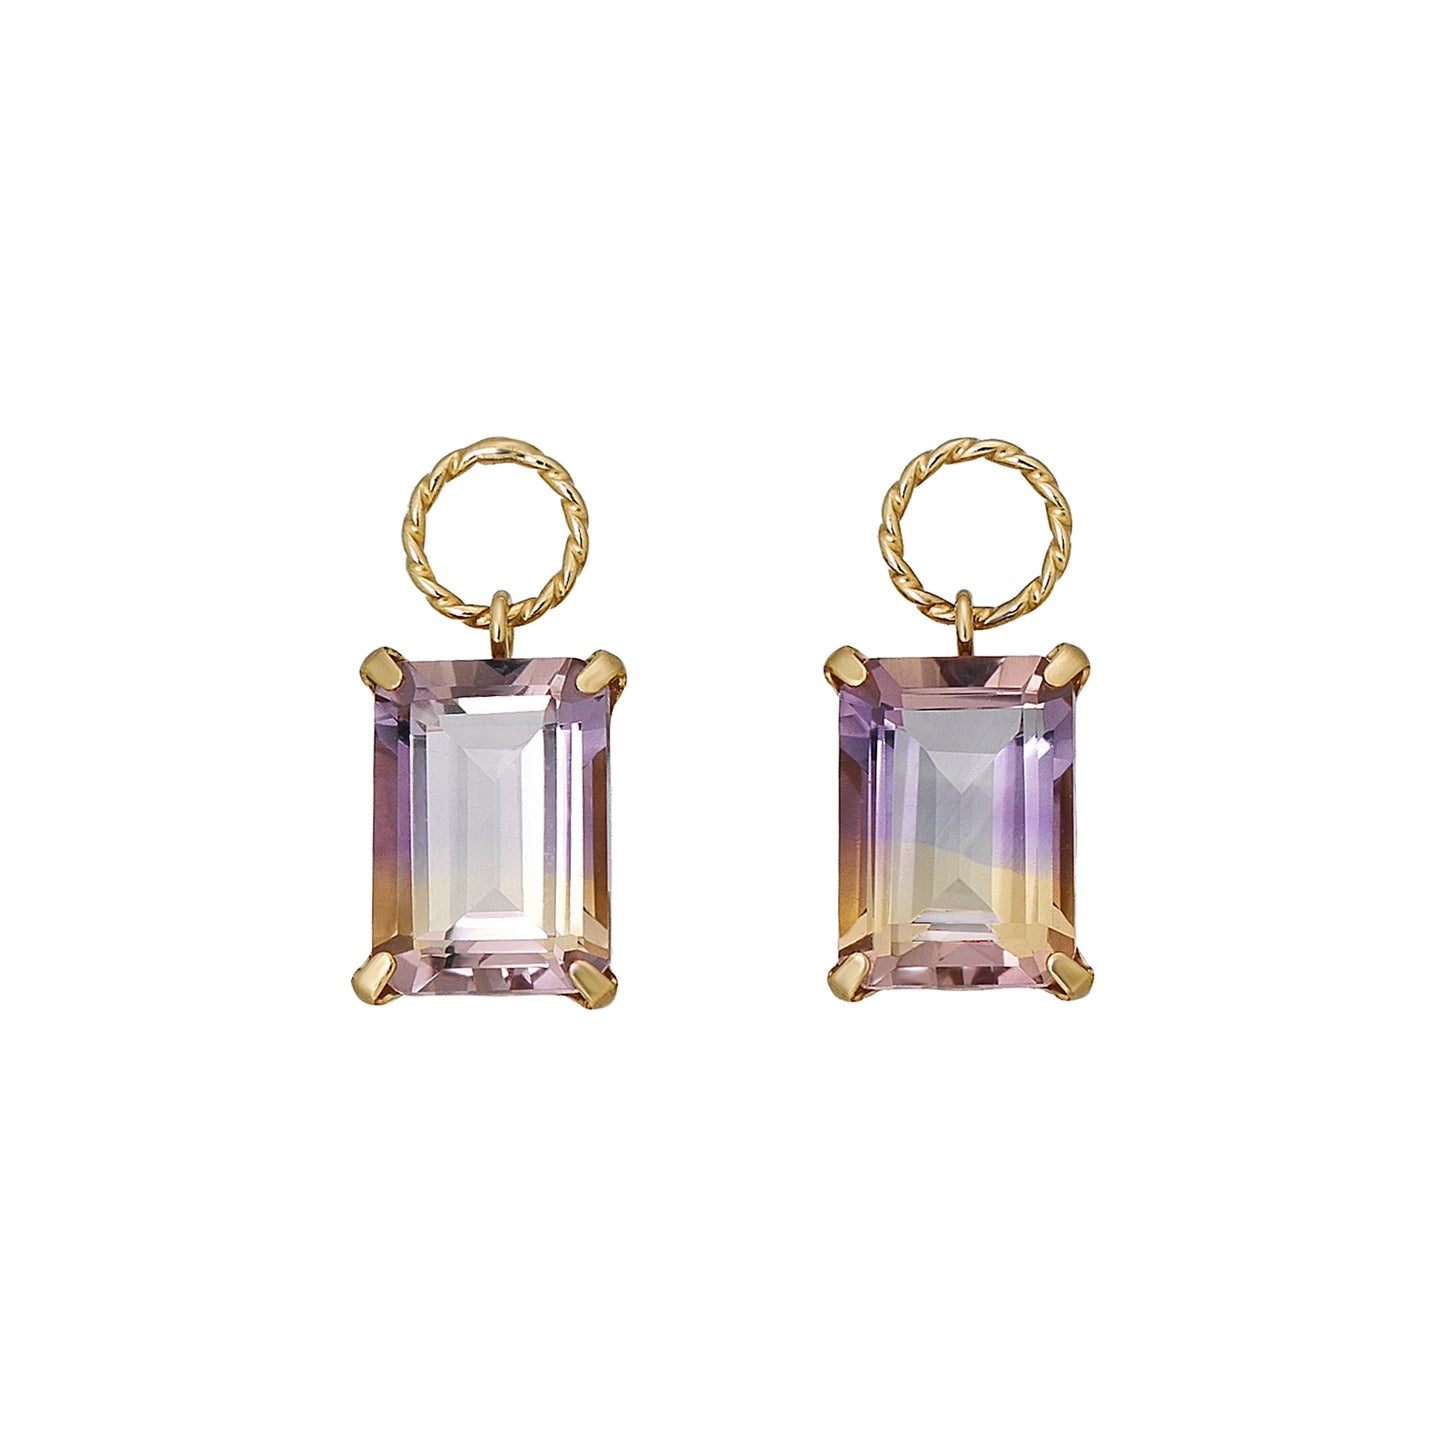 [Palette] 10K Yellow Gold Ametrine Square Charms For Hoop Earrings - Product Image